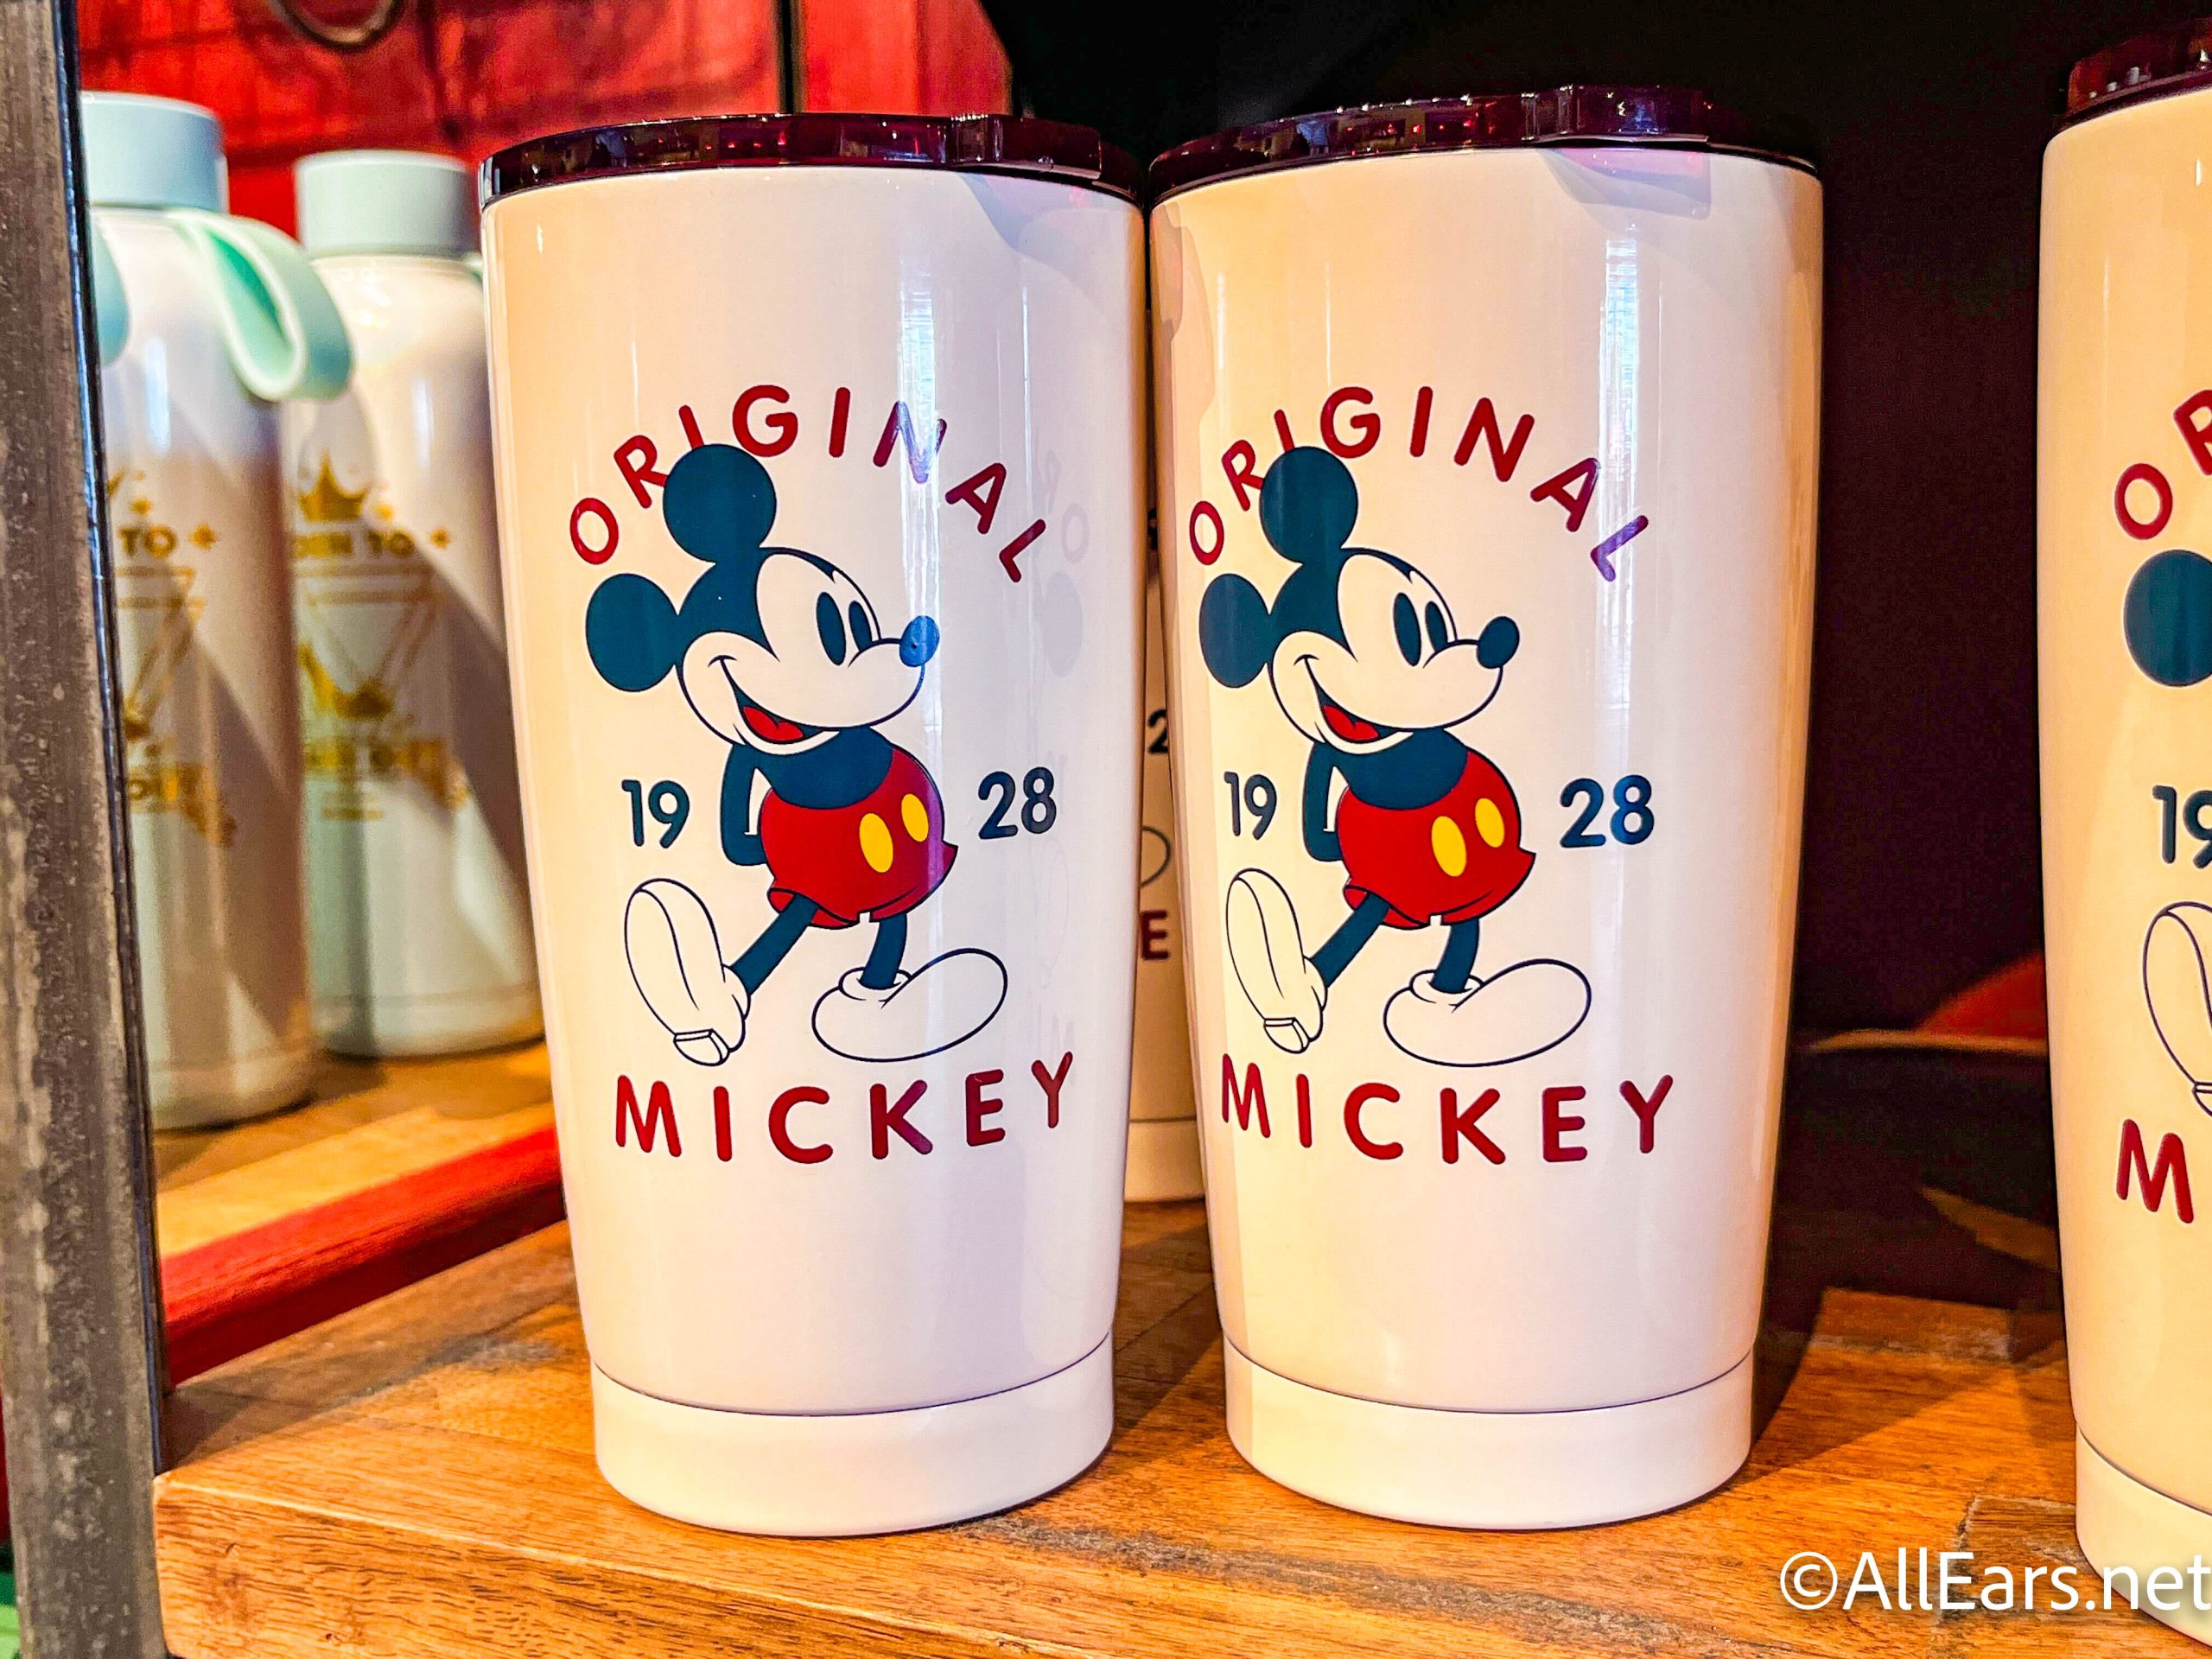 https://allears.net/wp-content/uploads/2022/04/wdw-2022-animal-kingdom-zuris-sweets-shop-mickey-mouse-original-coffee-mug-tumbler-cup-scaled.jpg